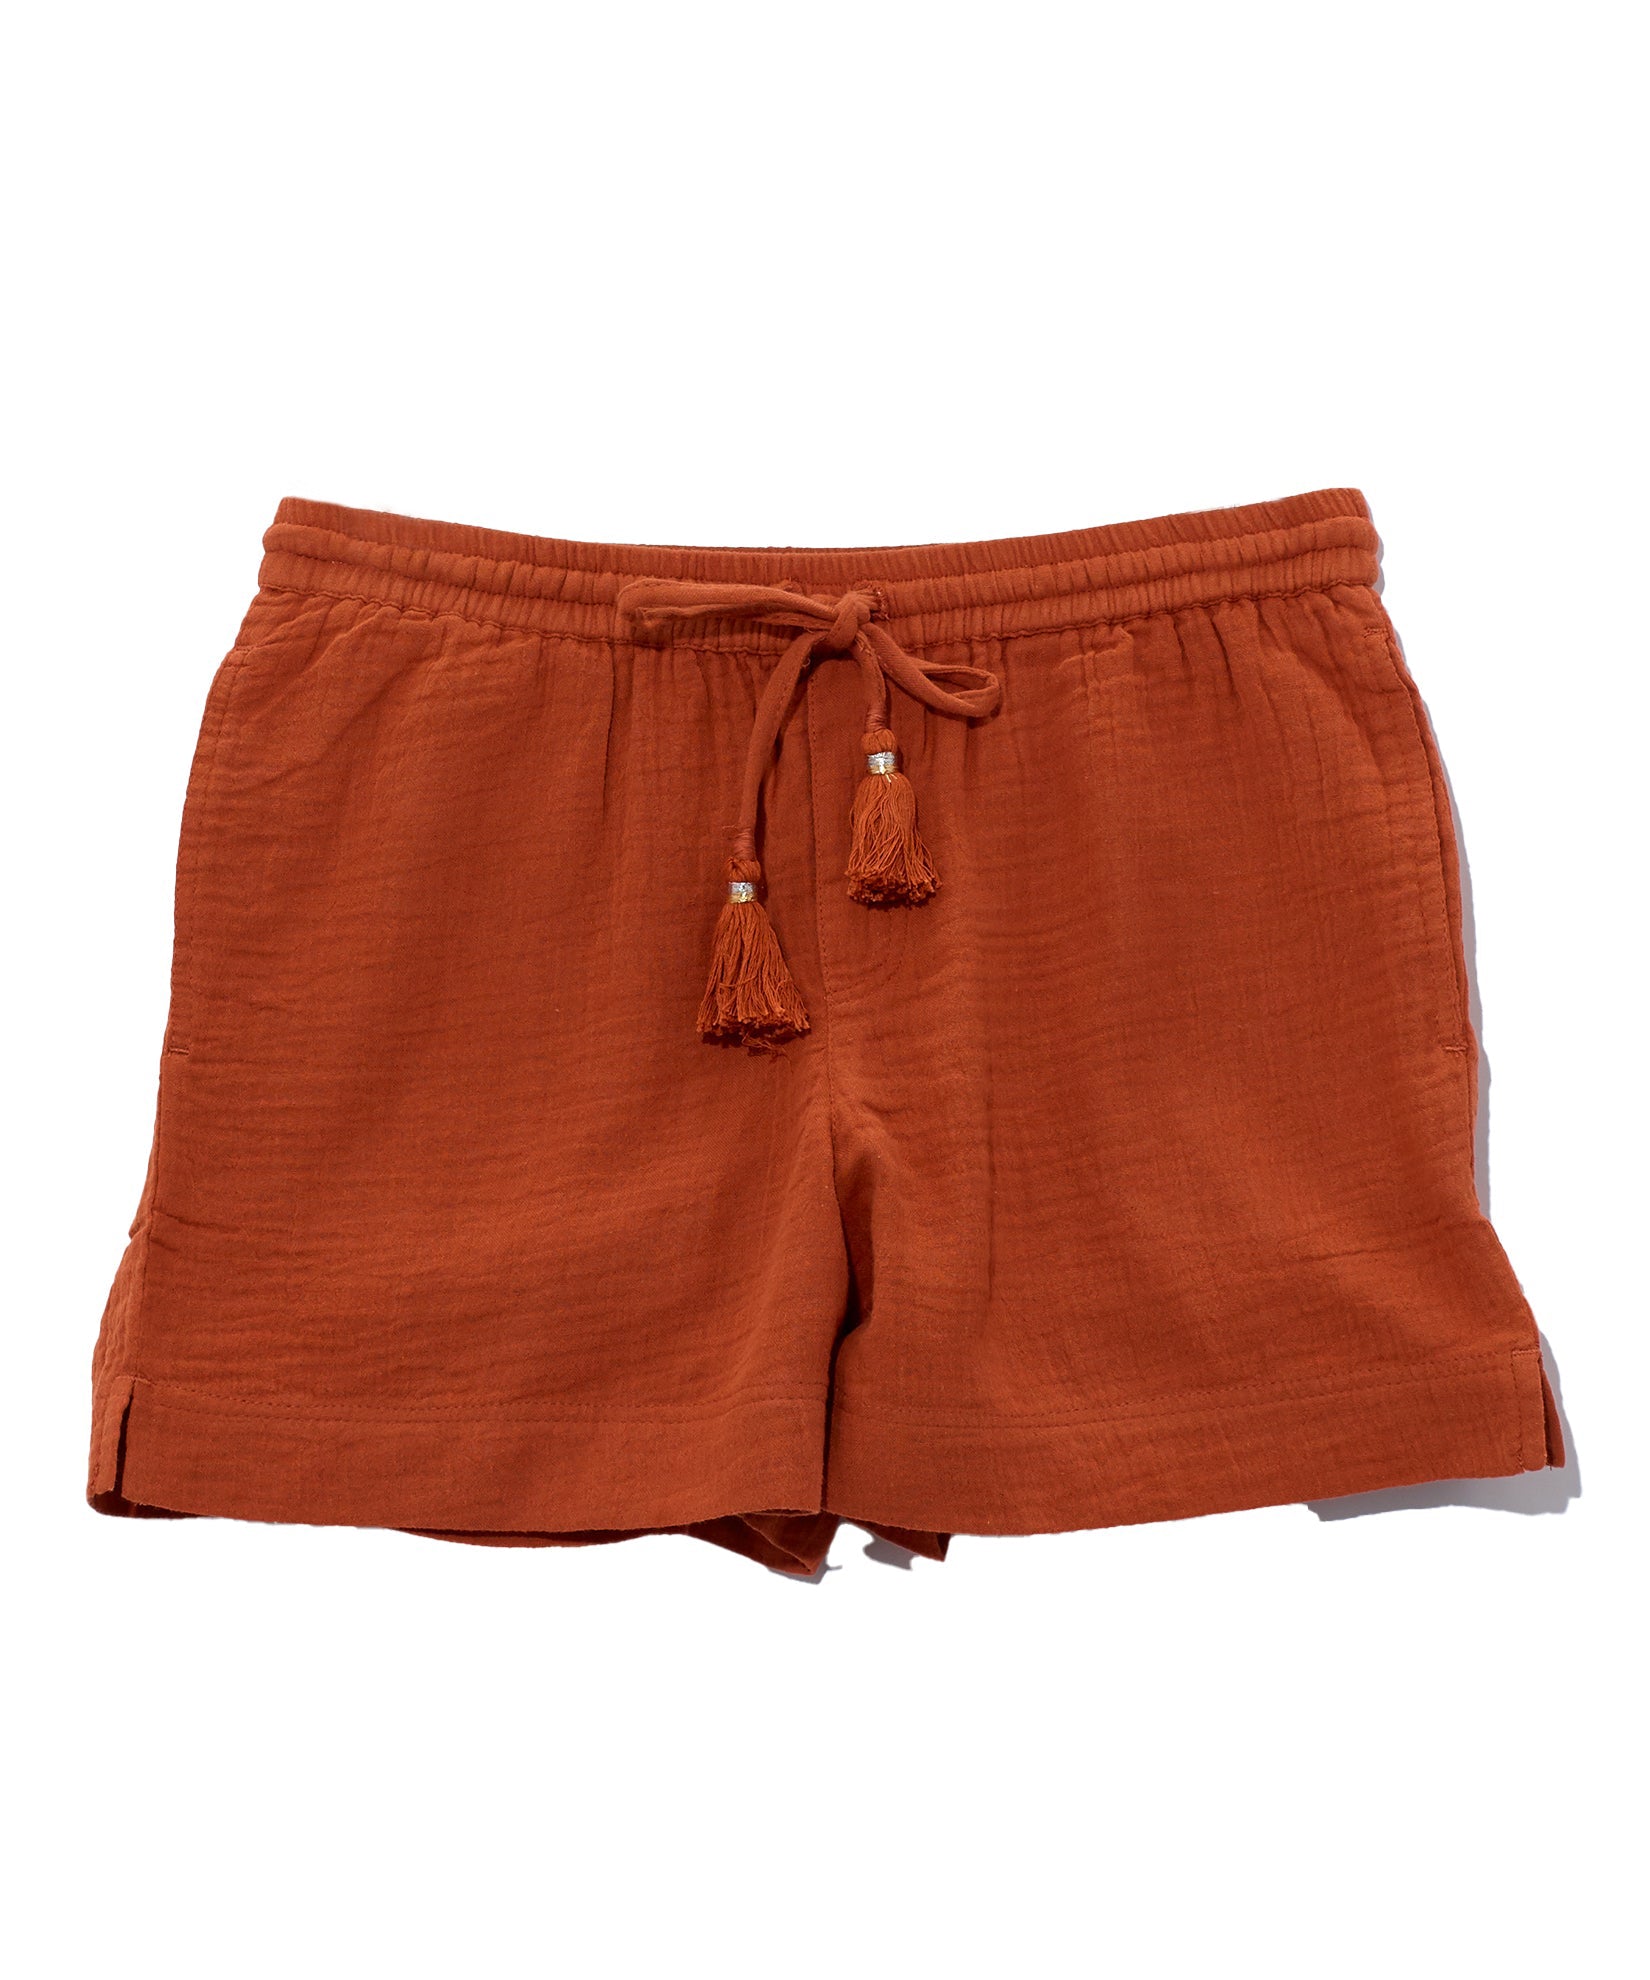 Double Gauze Beach Shorts in color Sienna